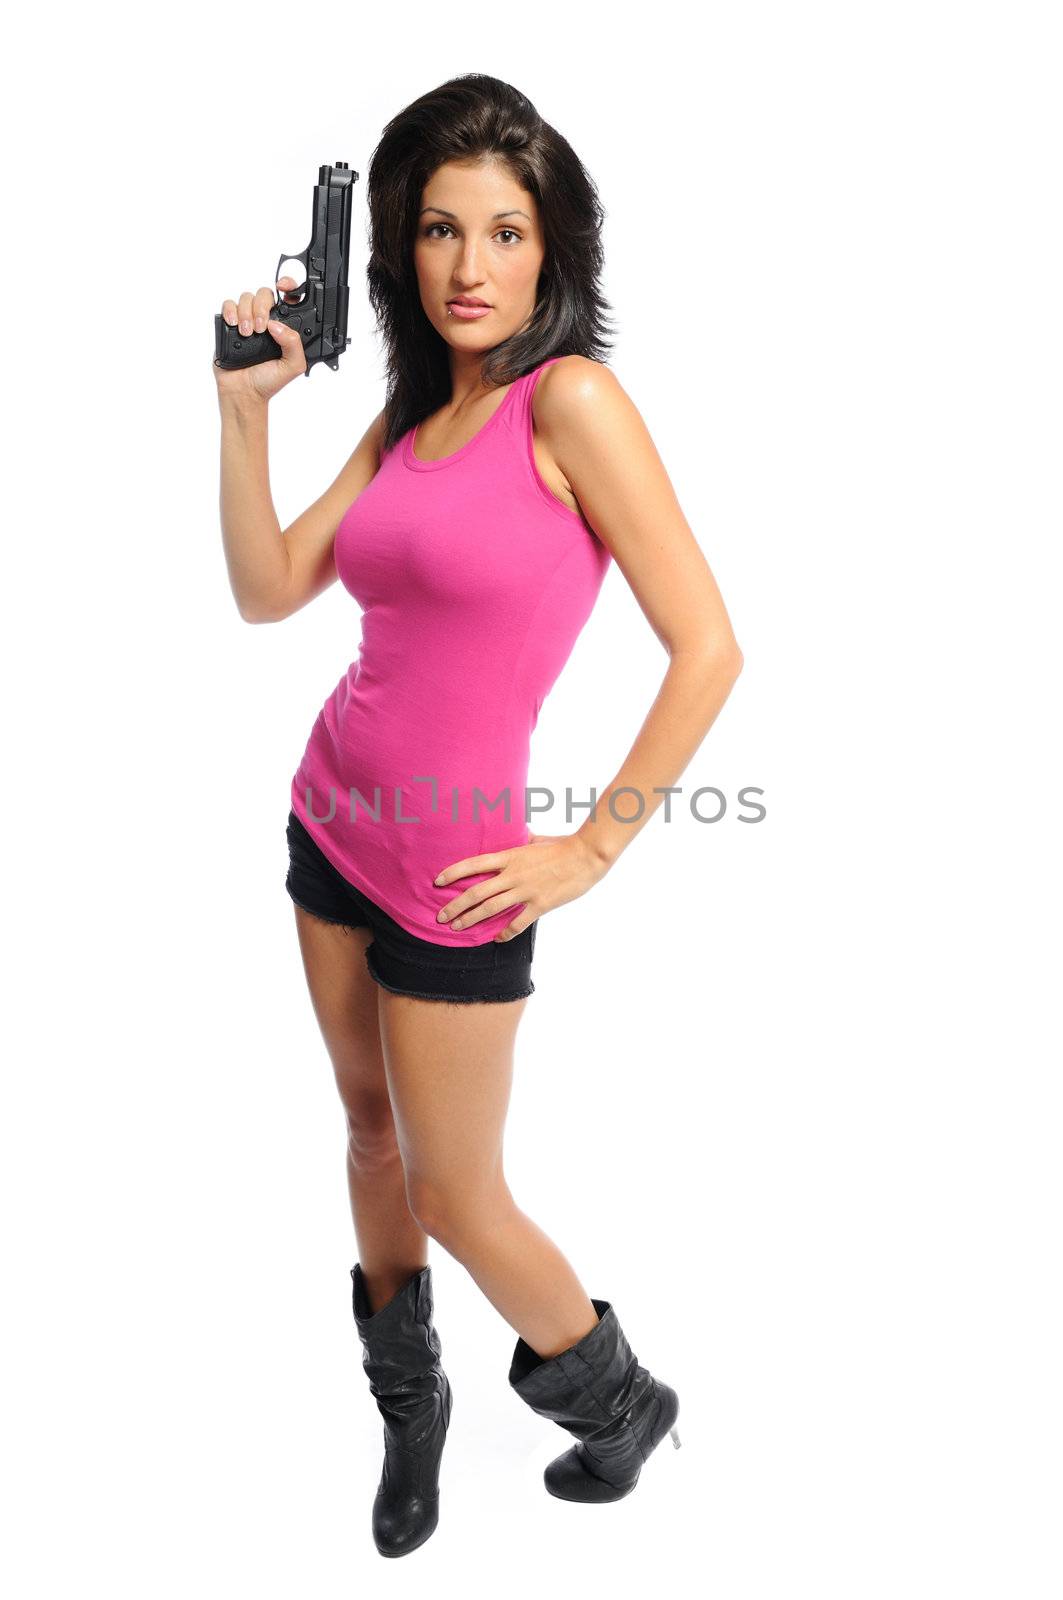 woman plays with a gun by PDImages